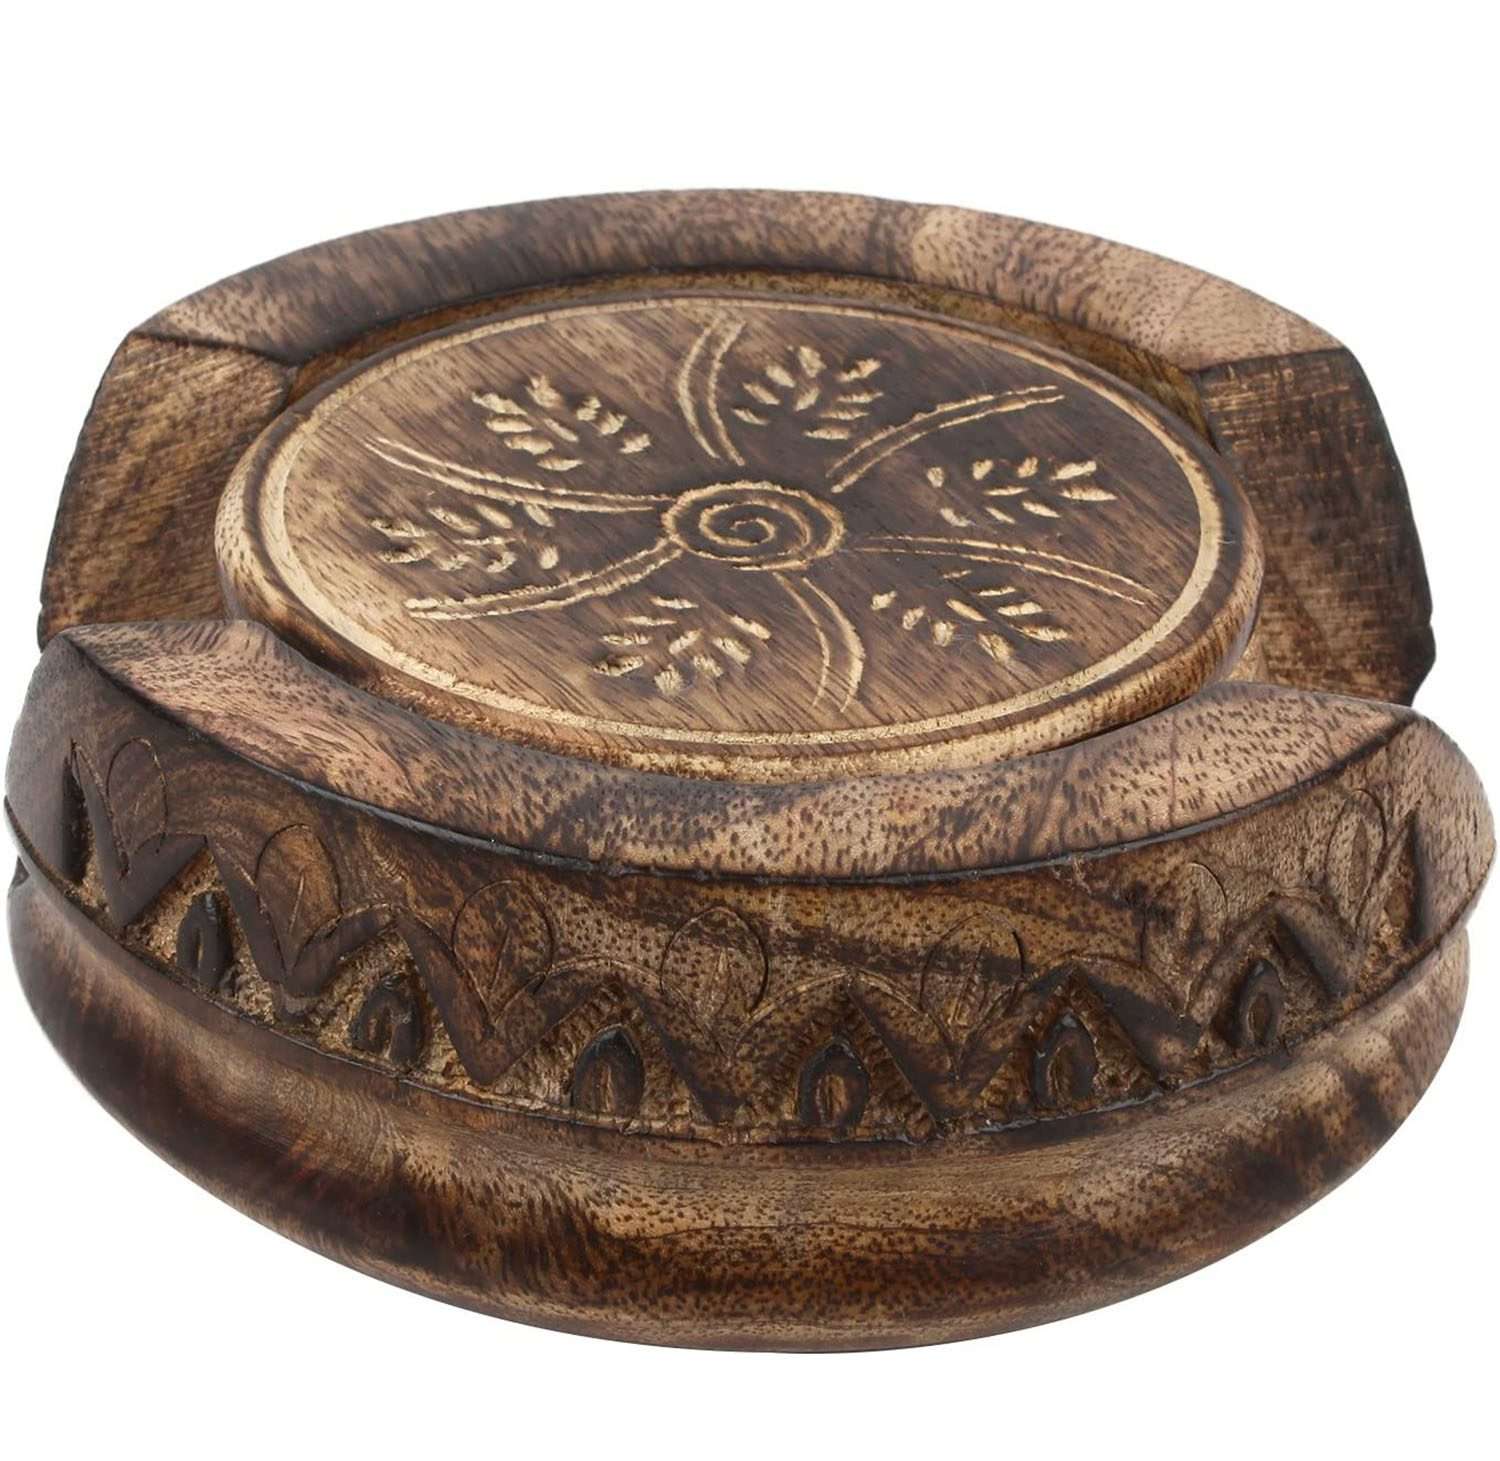 Handcrafted Wood Coaster Set Of 6| Coasters with Hand Carved Design Holder